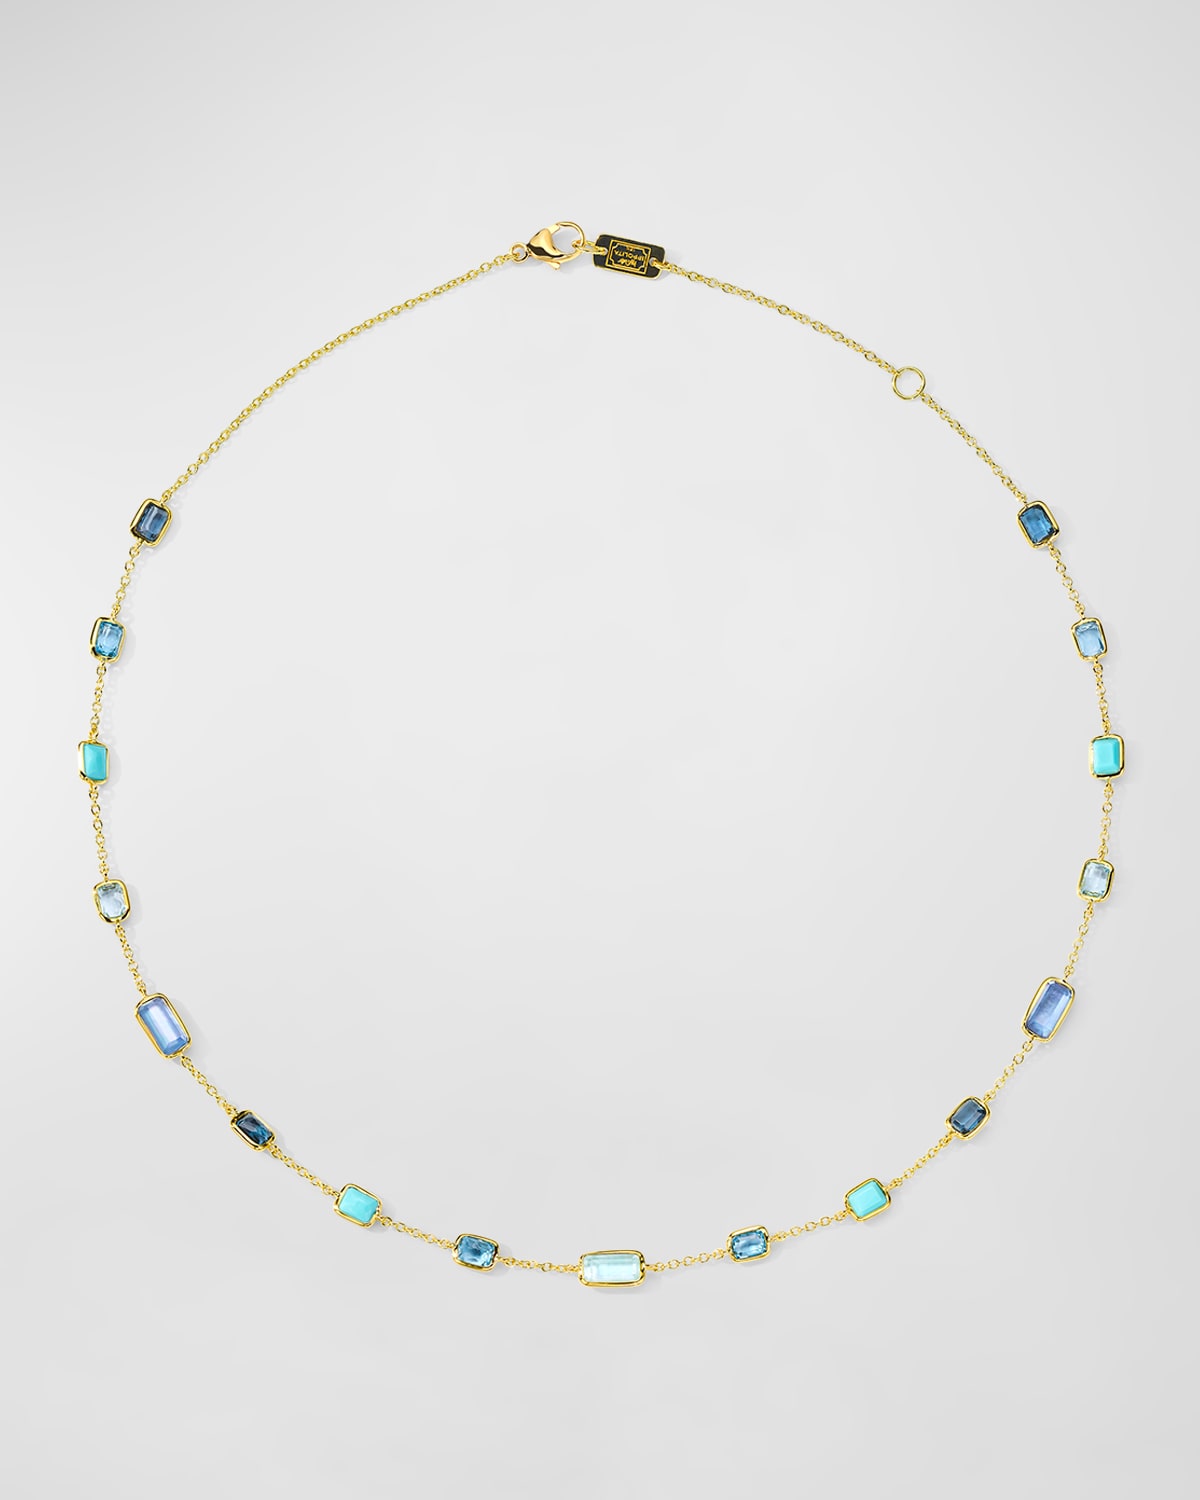 18K Rock Candy Octagon Long Necklace in Waterfall, 16-18"L